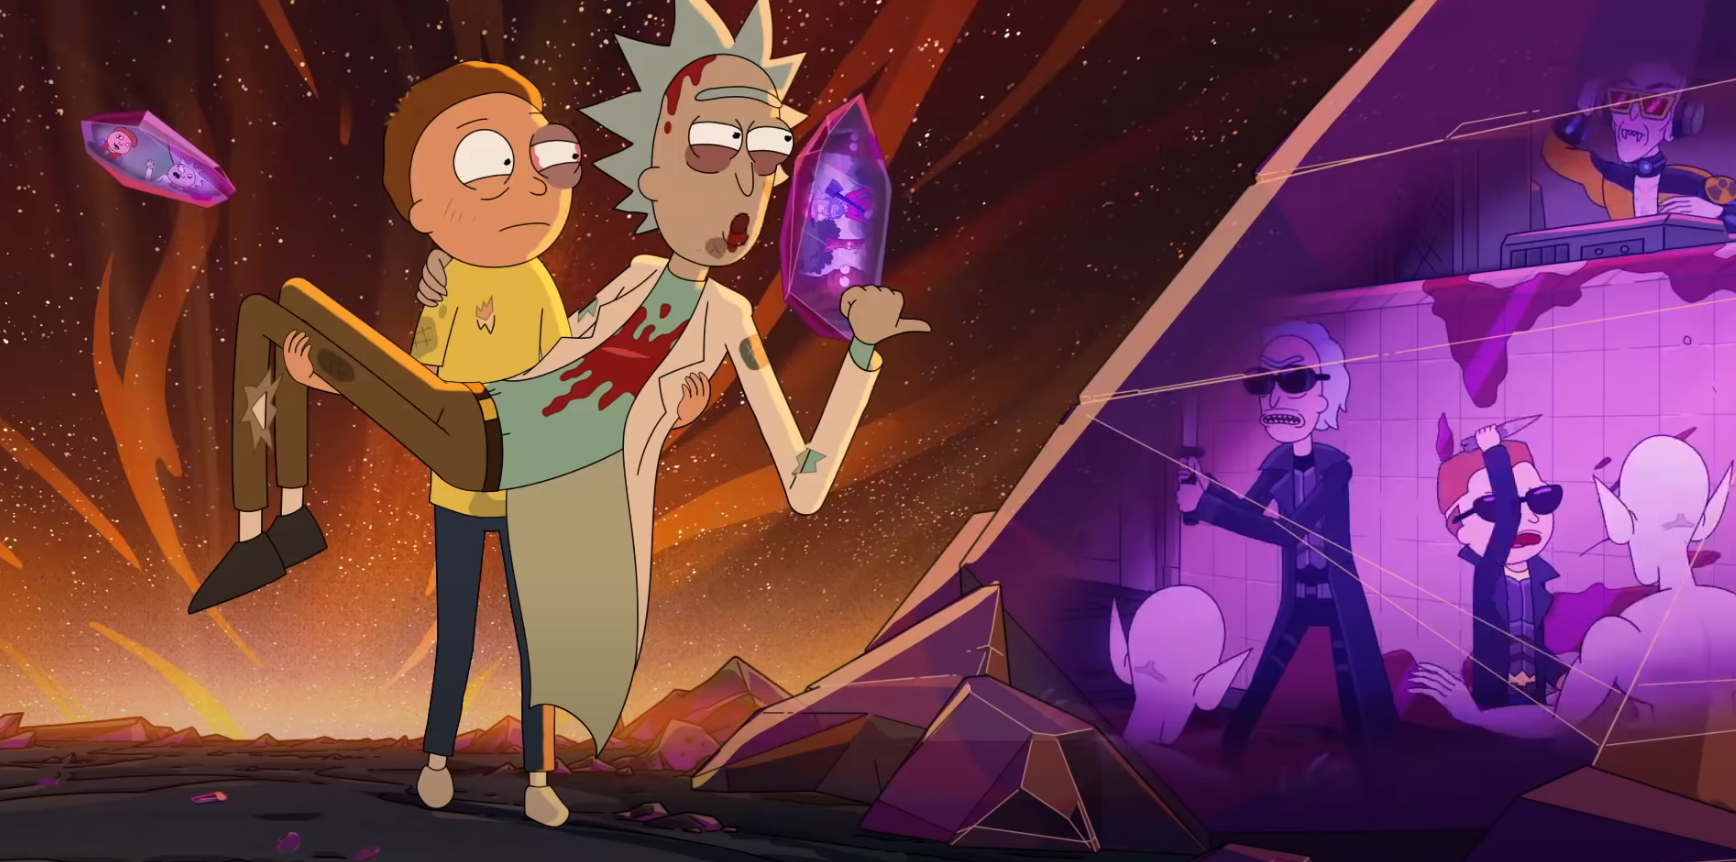 How To Watch Rick And Morty Season 5 Without Cable